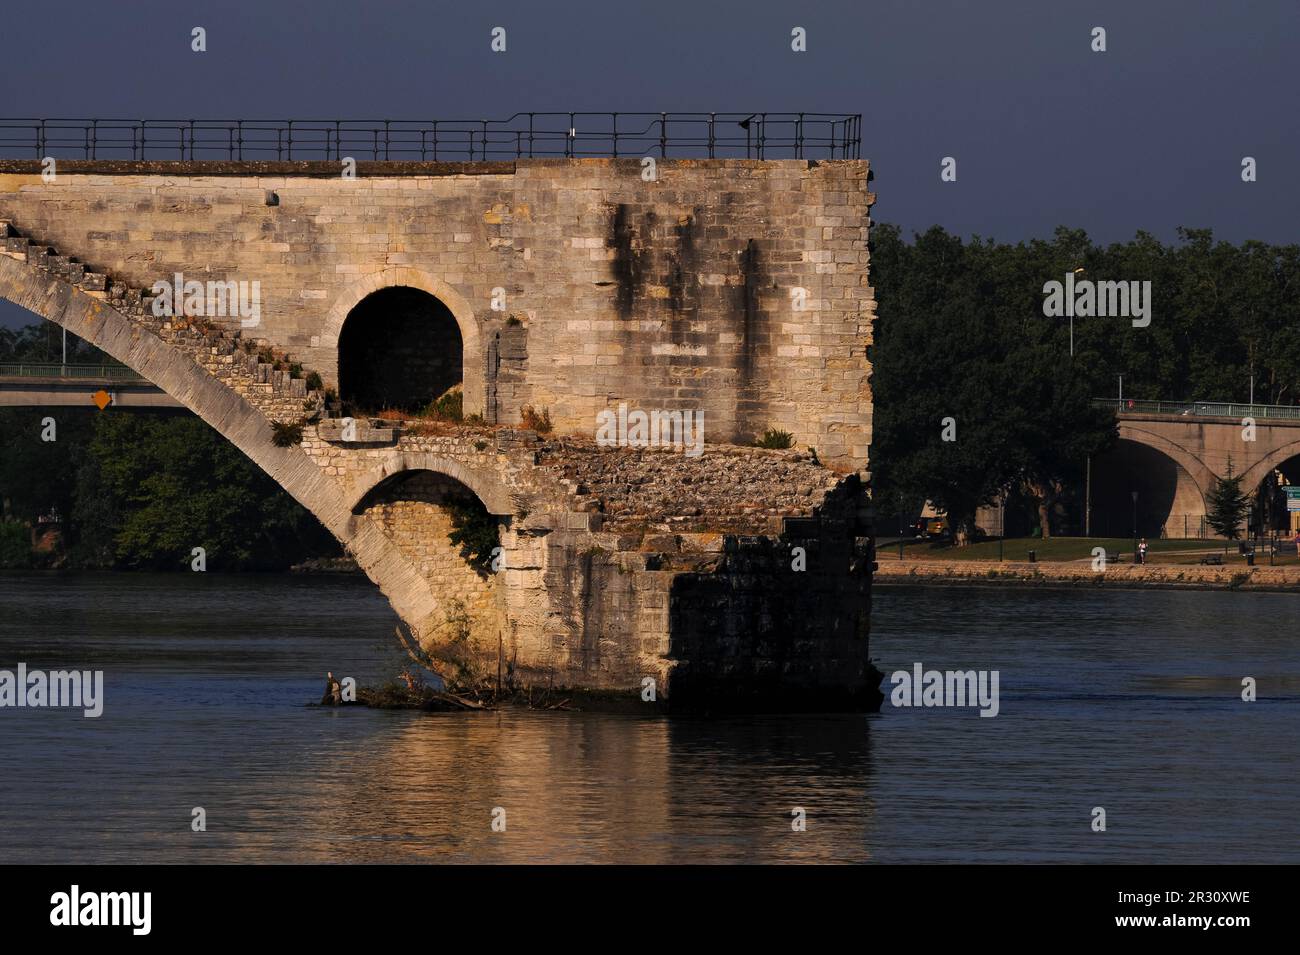 The ruined Pont d’Avignon or Pont Saint-Bénézet, a medieval bridge over the River Rhône where only four arches out of an original 22 have survived, the rest swept away by floods or destroyed in war.  At Avignon, capital of the Vaucluse department in the Provence-Alpes-Côte-d’Azur region of France.  This photograph was shot on an early July morning, between 7am and 8am. Stock Photo